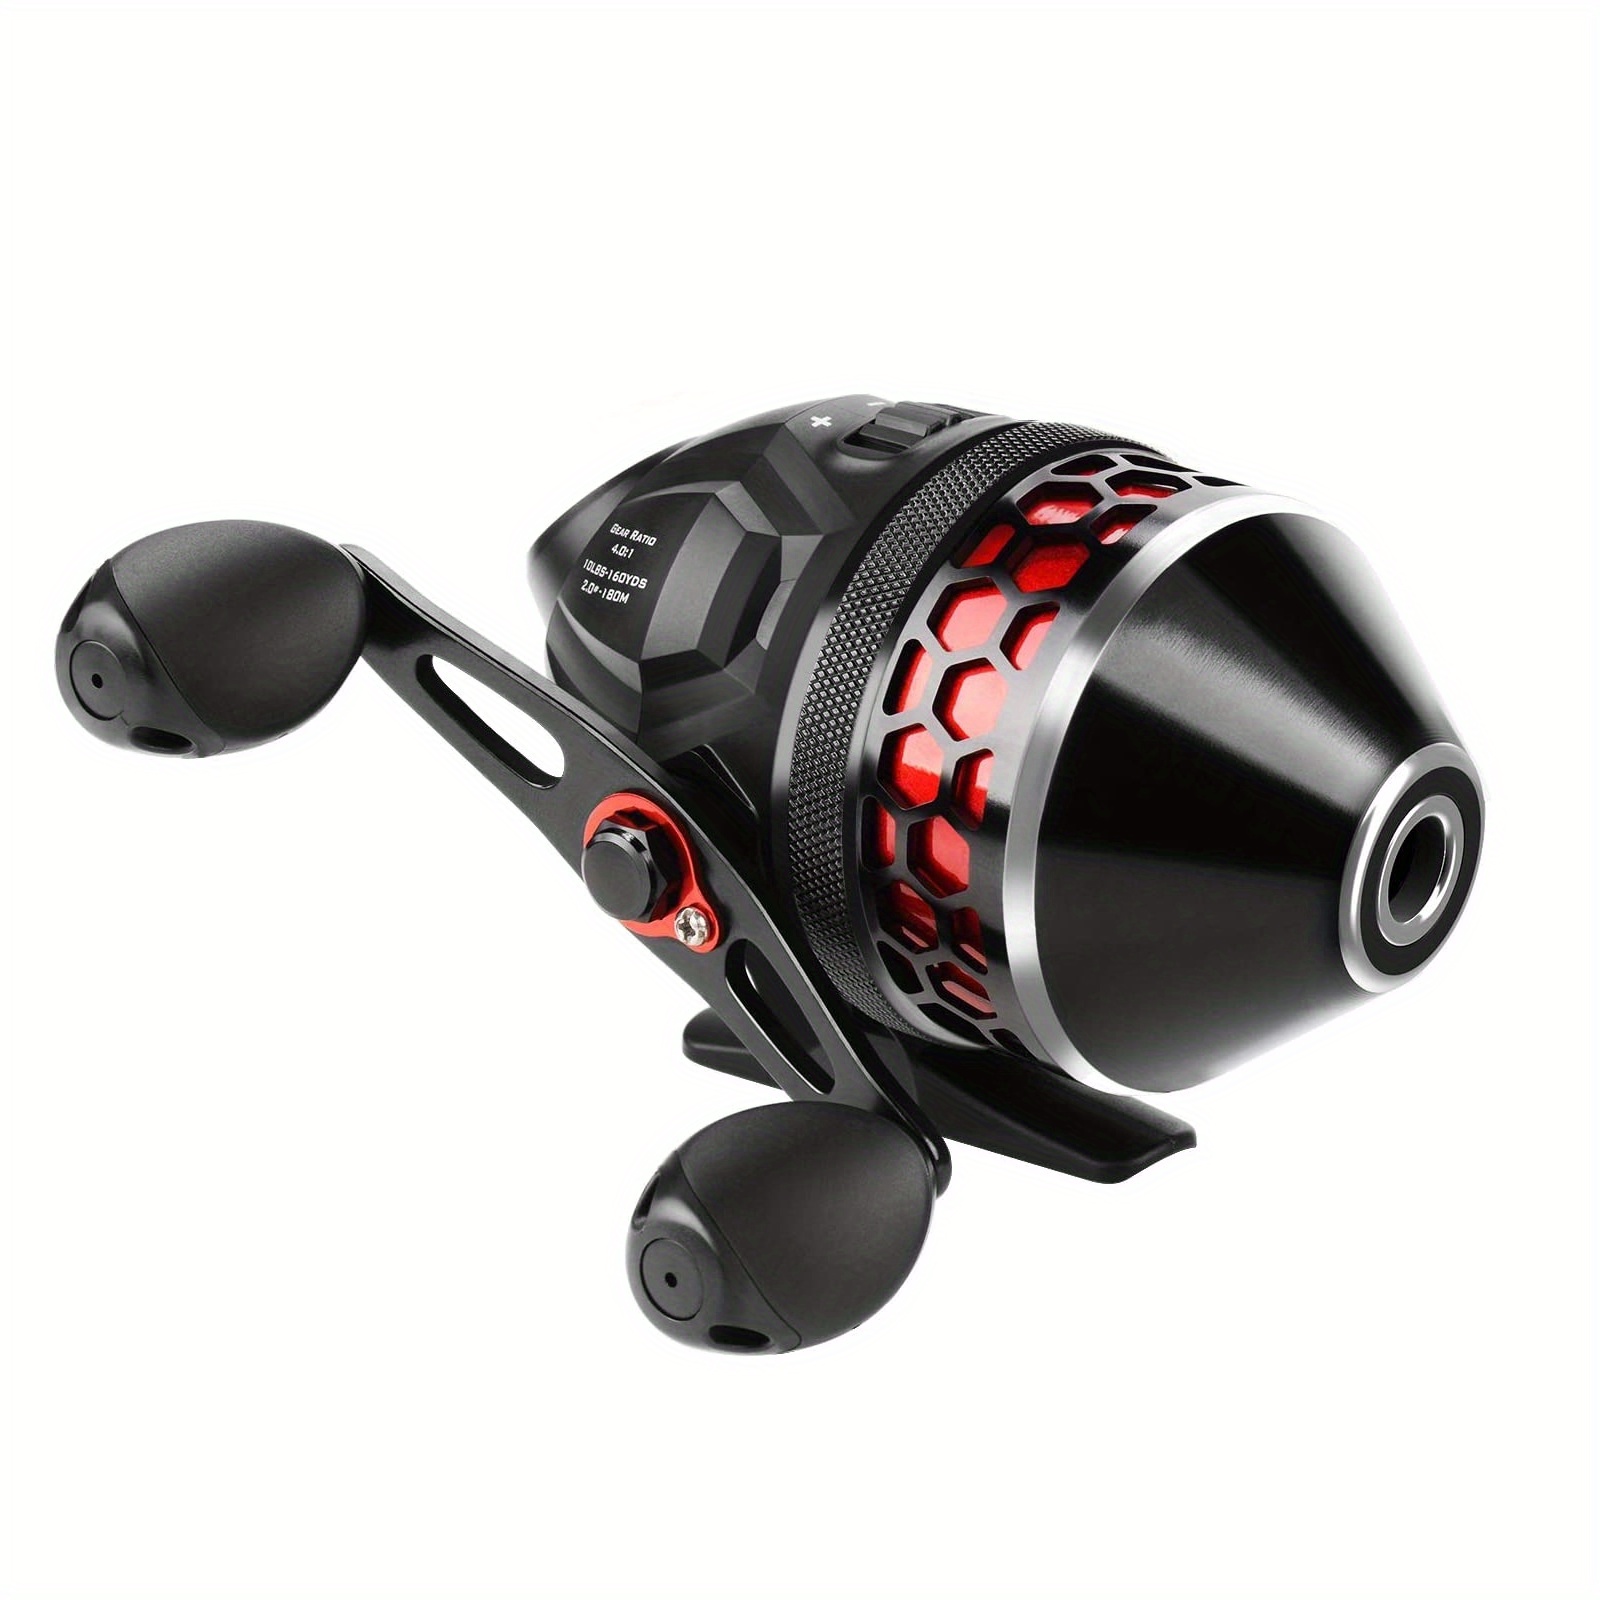 * Brutus Spincast Fishing Reel, Easy To Use Push Button Casting Design,  High Speed 4.0:1 Gear Ratio, 5 MaxiDur Ball Bearings, Reversible Handle